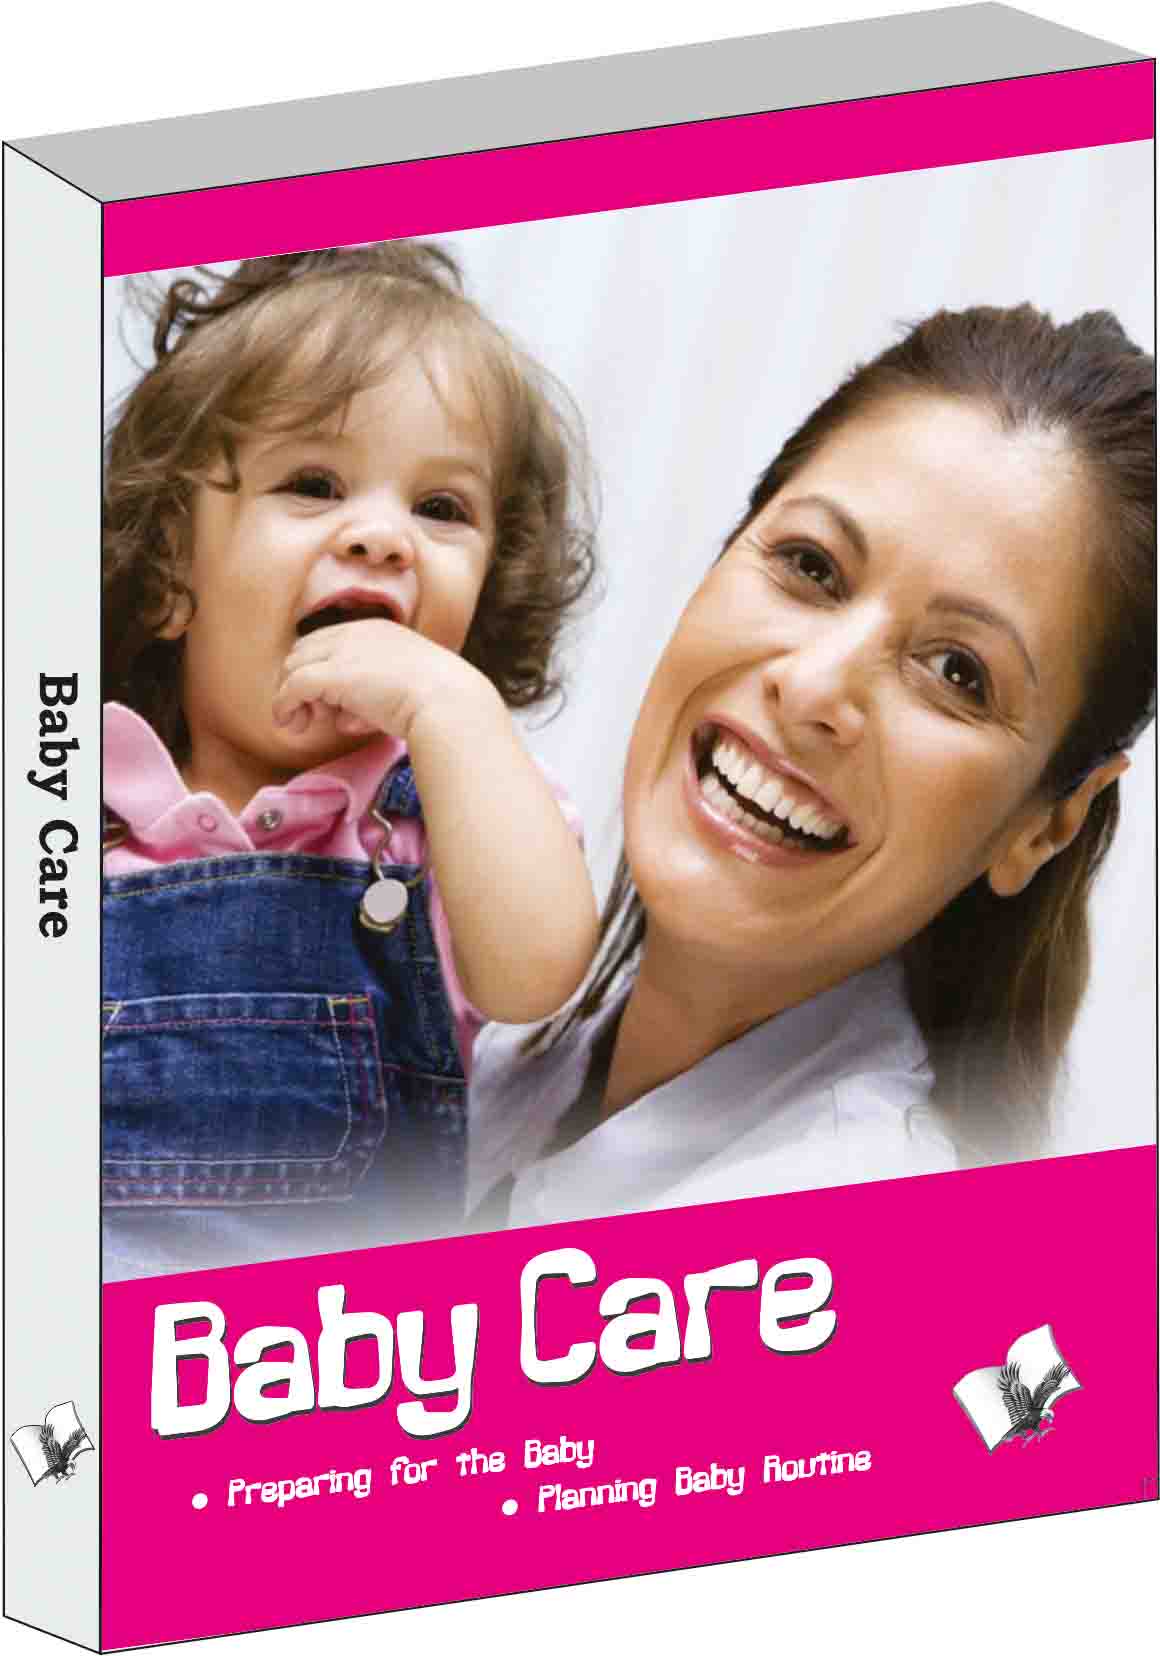 Baby care-What parents must do